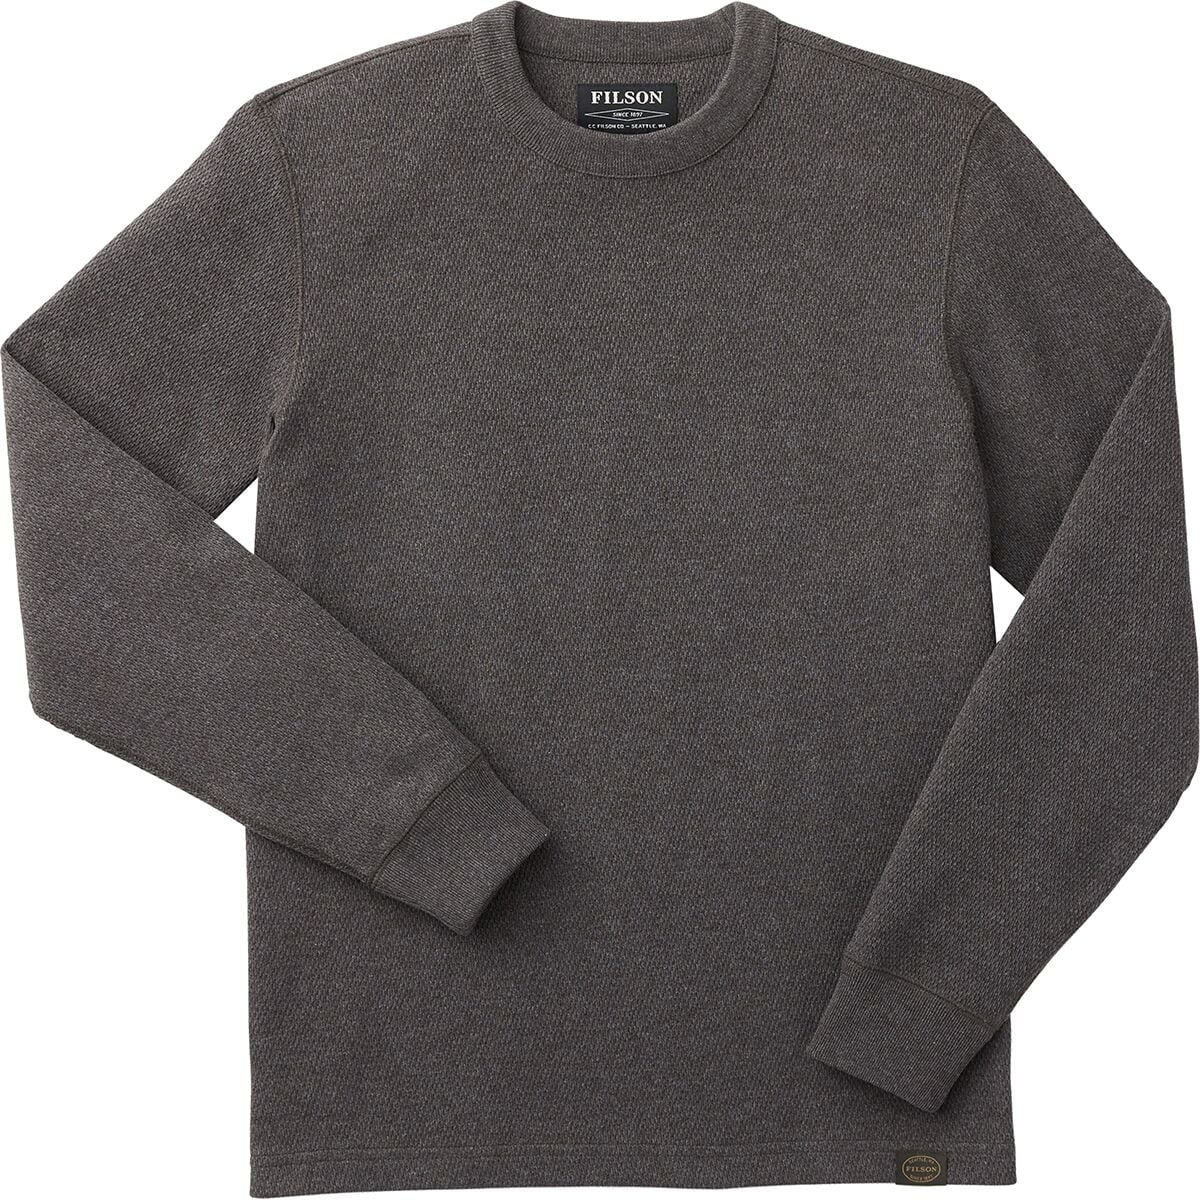 Filson Waffle Knit Thermal Crew - Men's - Clothing